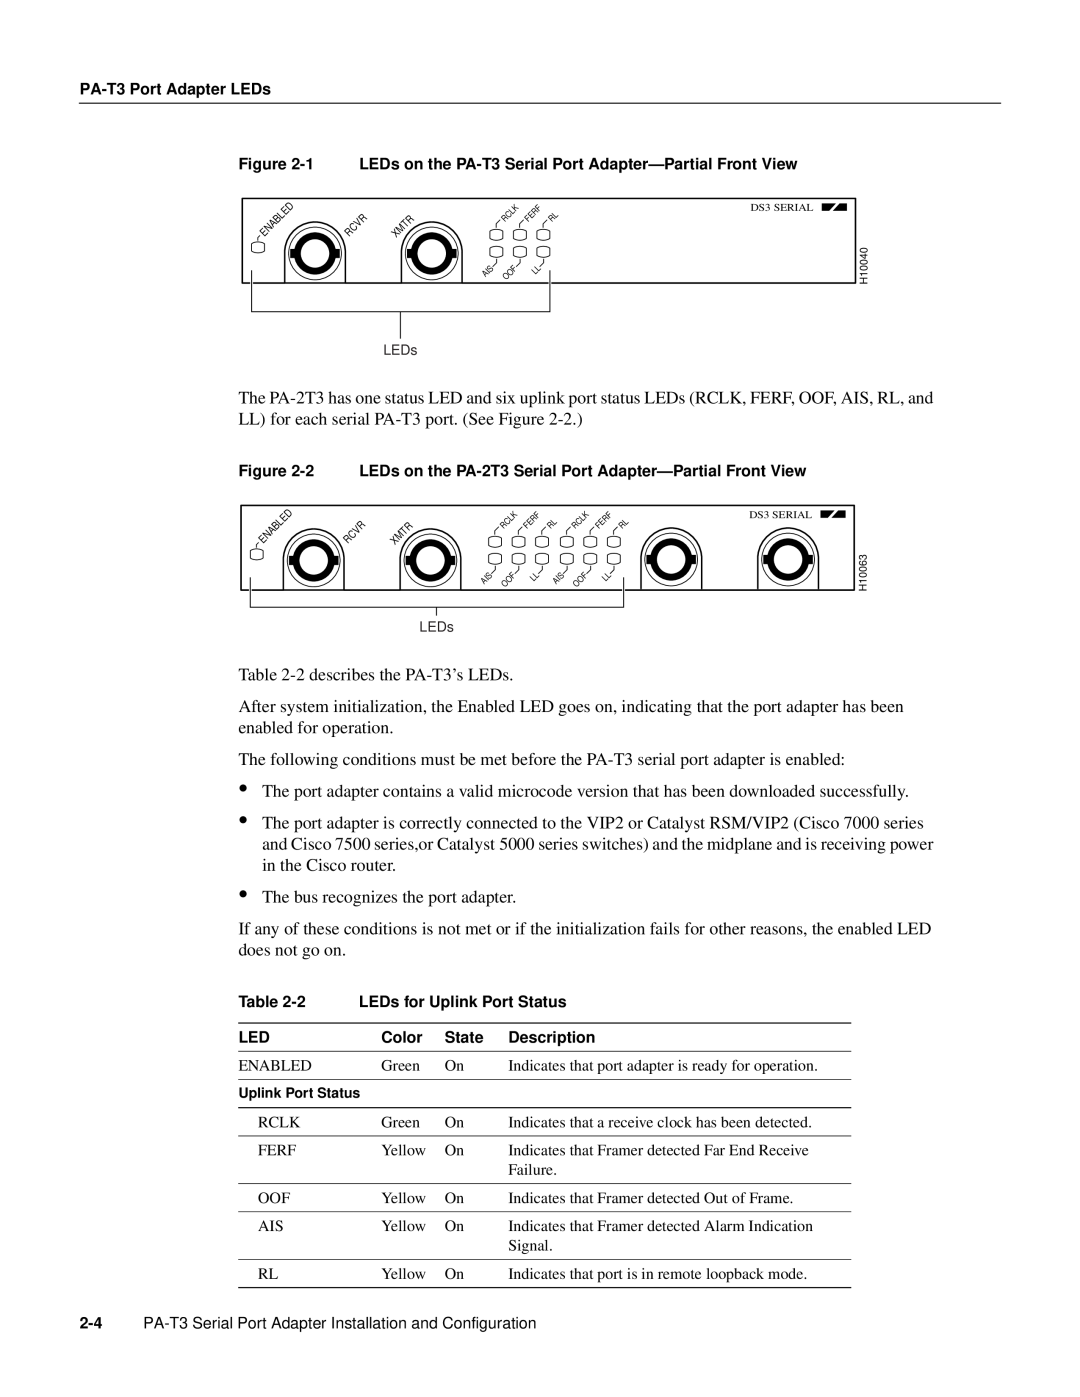 Cisco Systems manual 2 describes the PA-T3’s LEDs 